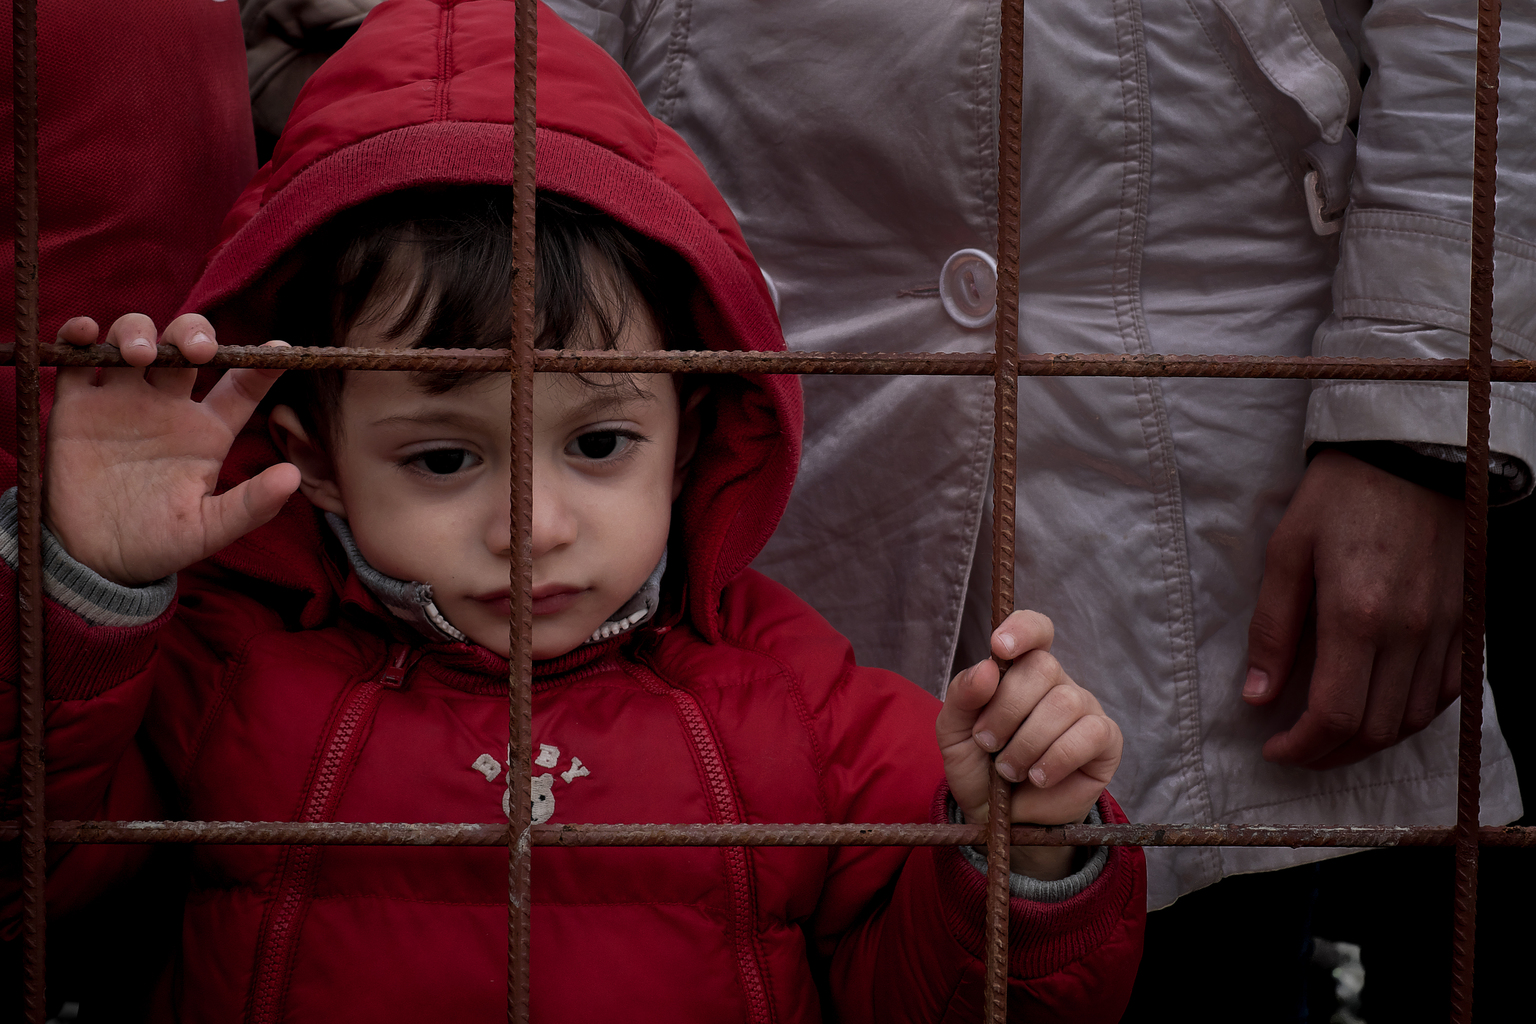 On 26 November, a small child stands with adults at a wire fence in the town of Gevgelija, on the border with Greece. In the former Yugoslav Republic of Macedonia, the Government has begun restricting the flow of refugees and migrants on the move, and is allowing only Syrians, Iraqis and Afghans to continue their journey. About 1,000 people are stranded at the main entry point into the former Yugoslav Republic of Macedonia from Greece. In late November 2015, refugee and migrant flows into Europe remain at an unprecedented high. Since the beginning of the year, over 870,000 refugees and migrants have crossed the Mediterranean Sea to Europe. Many of them are escaping conflict and insecurity in their home countries of Afghanistan, Iraq, Pakistan and the Syrian Arab Republic. More than one in five is a child.  Recent restrictions imposed by governments at several border crossings in the Balkans is creating additional hardships and challenges for refugee and migrants, including leaving some stranded at various crossing points, creating tensions and protests at border crossings, or forcing others to take further risks by taking dangerous smuggling routes to reach safety. UNICEF, together with partners UNHCR and IOM, is supporting child-friendly spaces in reception centres at border crossings along the Balkan routes, mobilizing for winter and working with governments to strengthen child protection systems for all children, including refugee and migrant children. UNICEF is also monitoring and providing assistance with partners at these points, and is providing blankets, winter clothing and other key items to meet basic needs. In late November 2015, refugee and migrant flows into Europe remain at an unprecedented high. Since the beginning of the year, over 870,000 refugees and migrants have crossed the Mediterranean Sea to Europe. Many of them are escaping conflict and insecurity in their home countries of Afghanistan, Iraq, Pakistan and the Syrian Arab Republic. More th